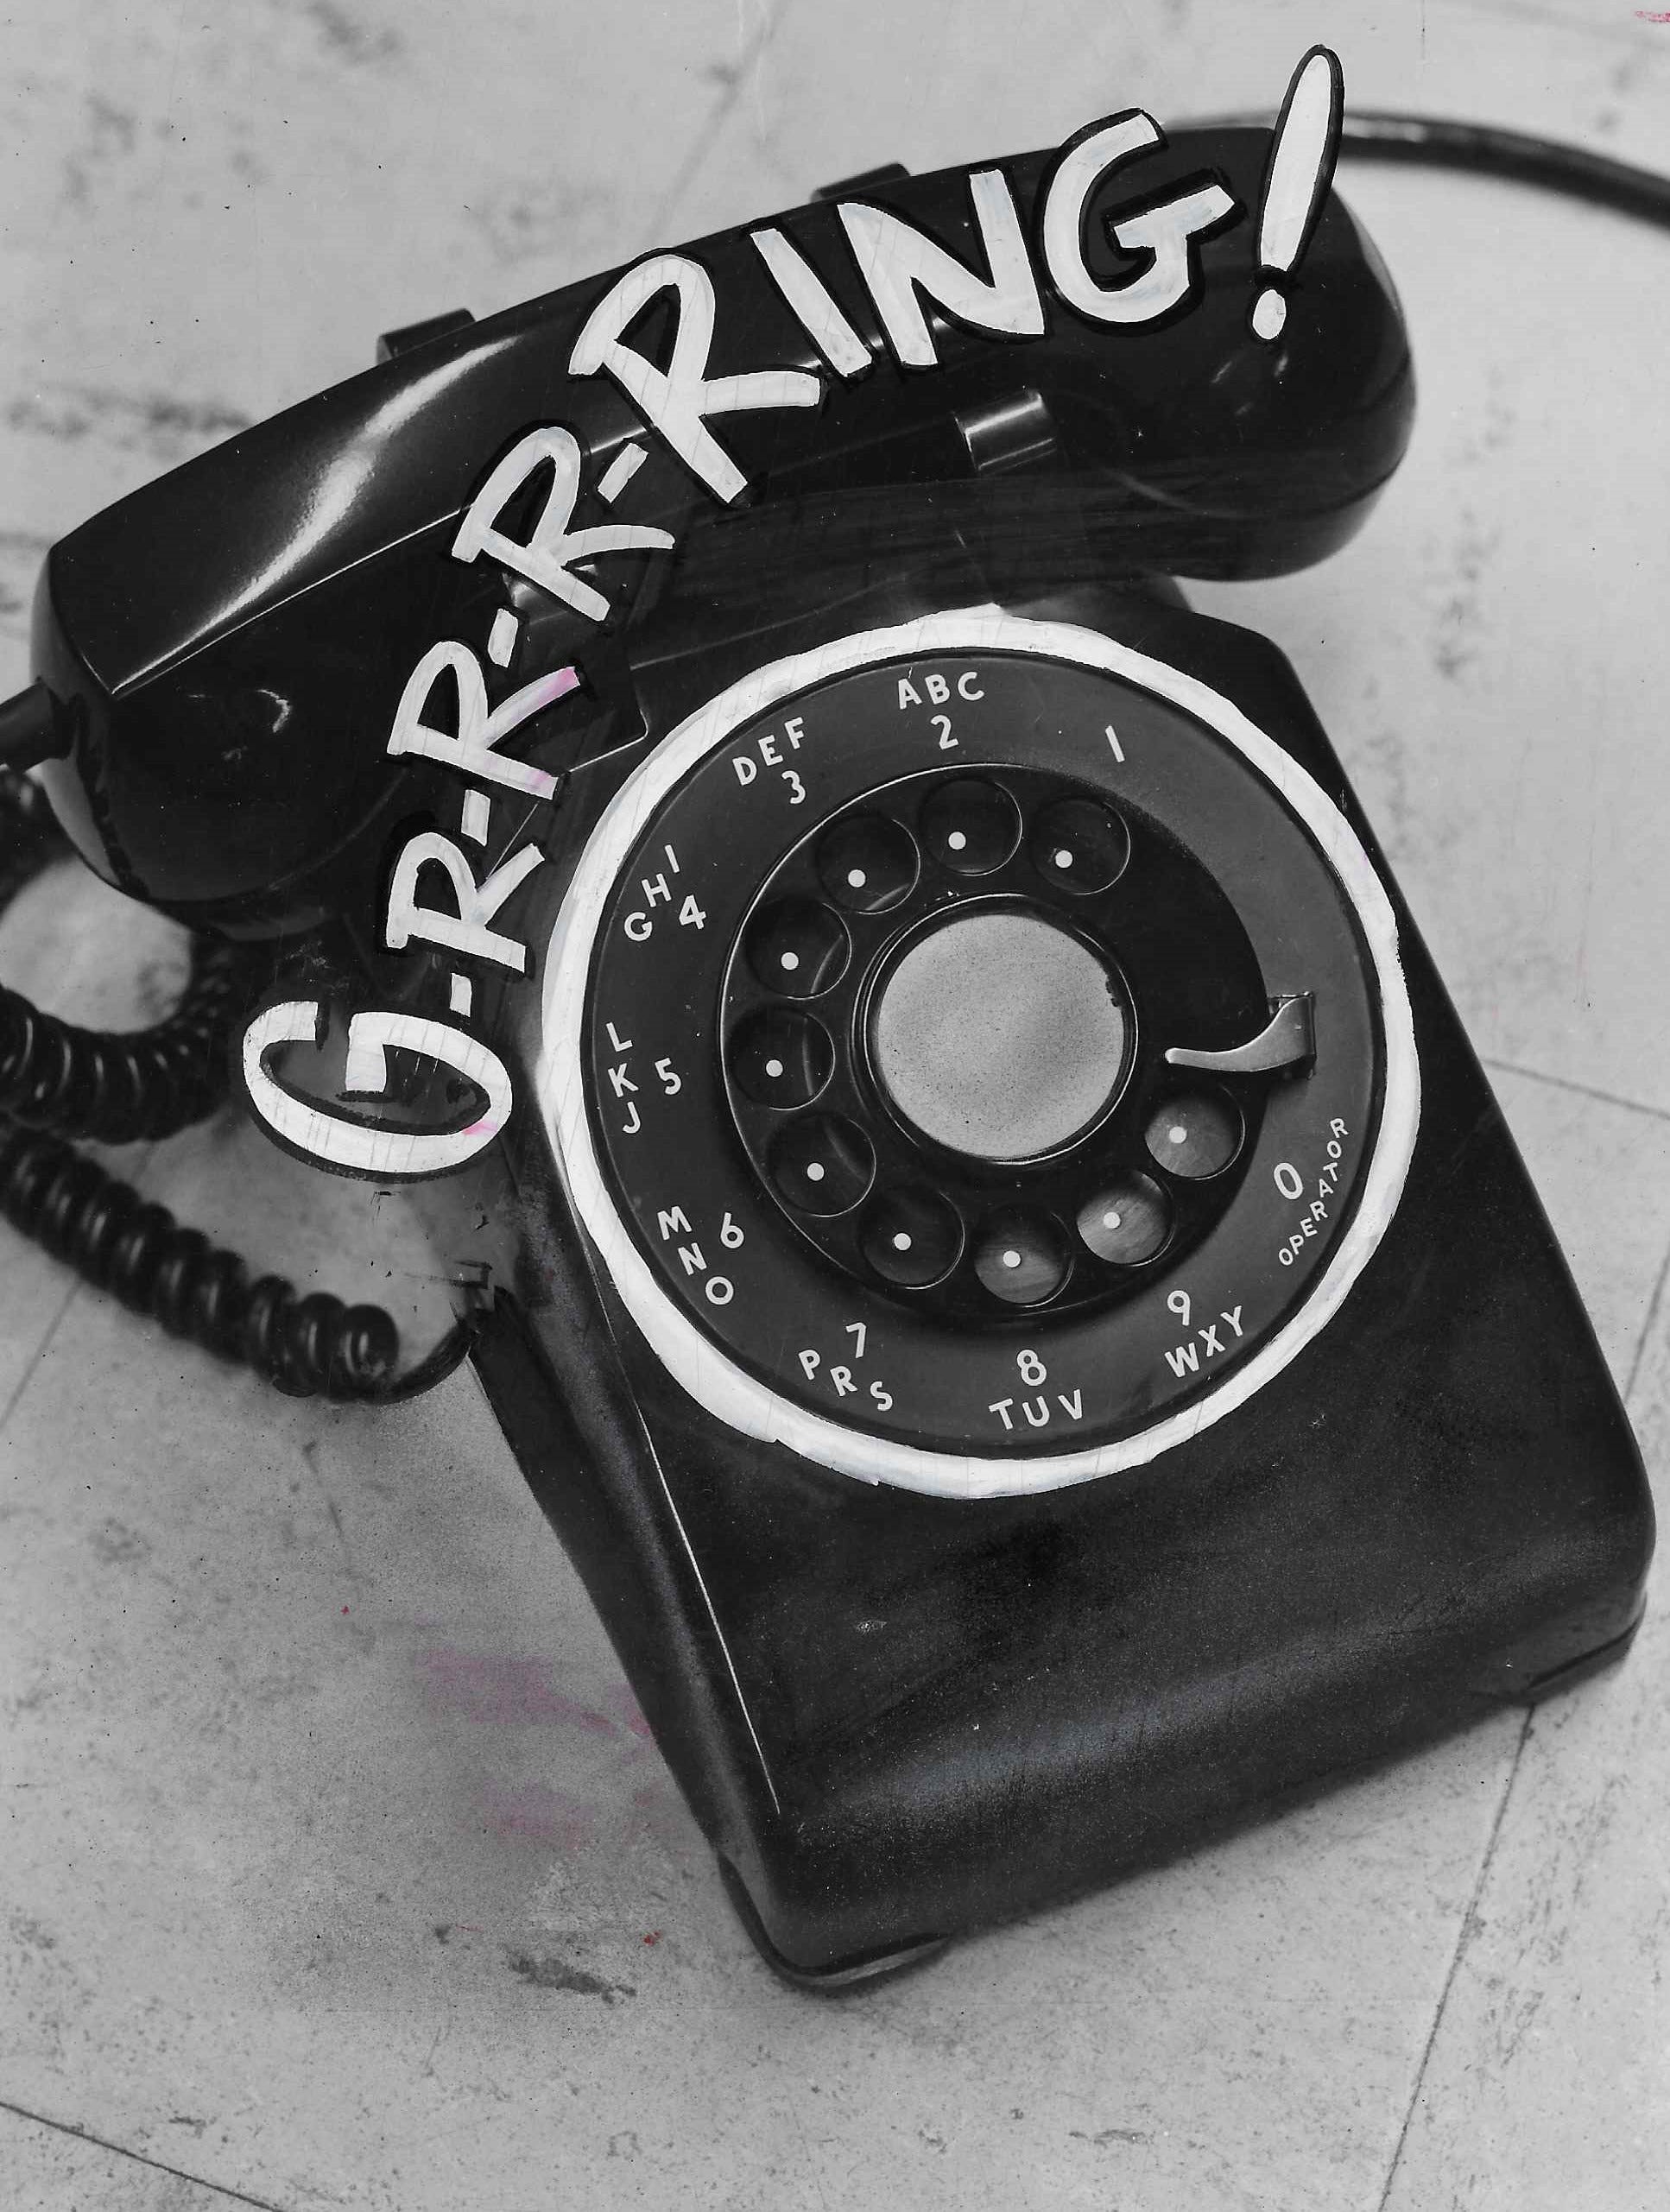 Prank calls redialed: Readers share memories of fun on the phone